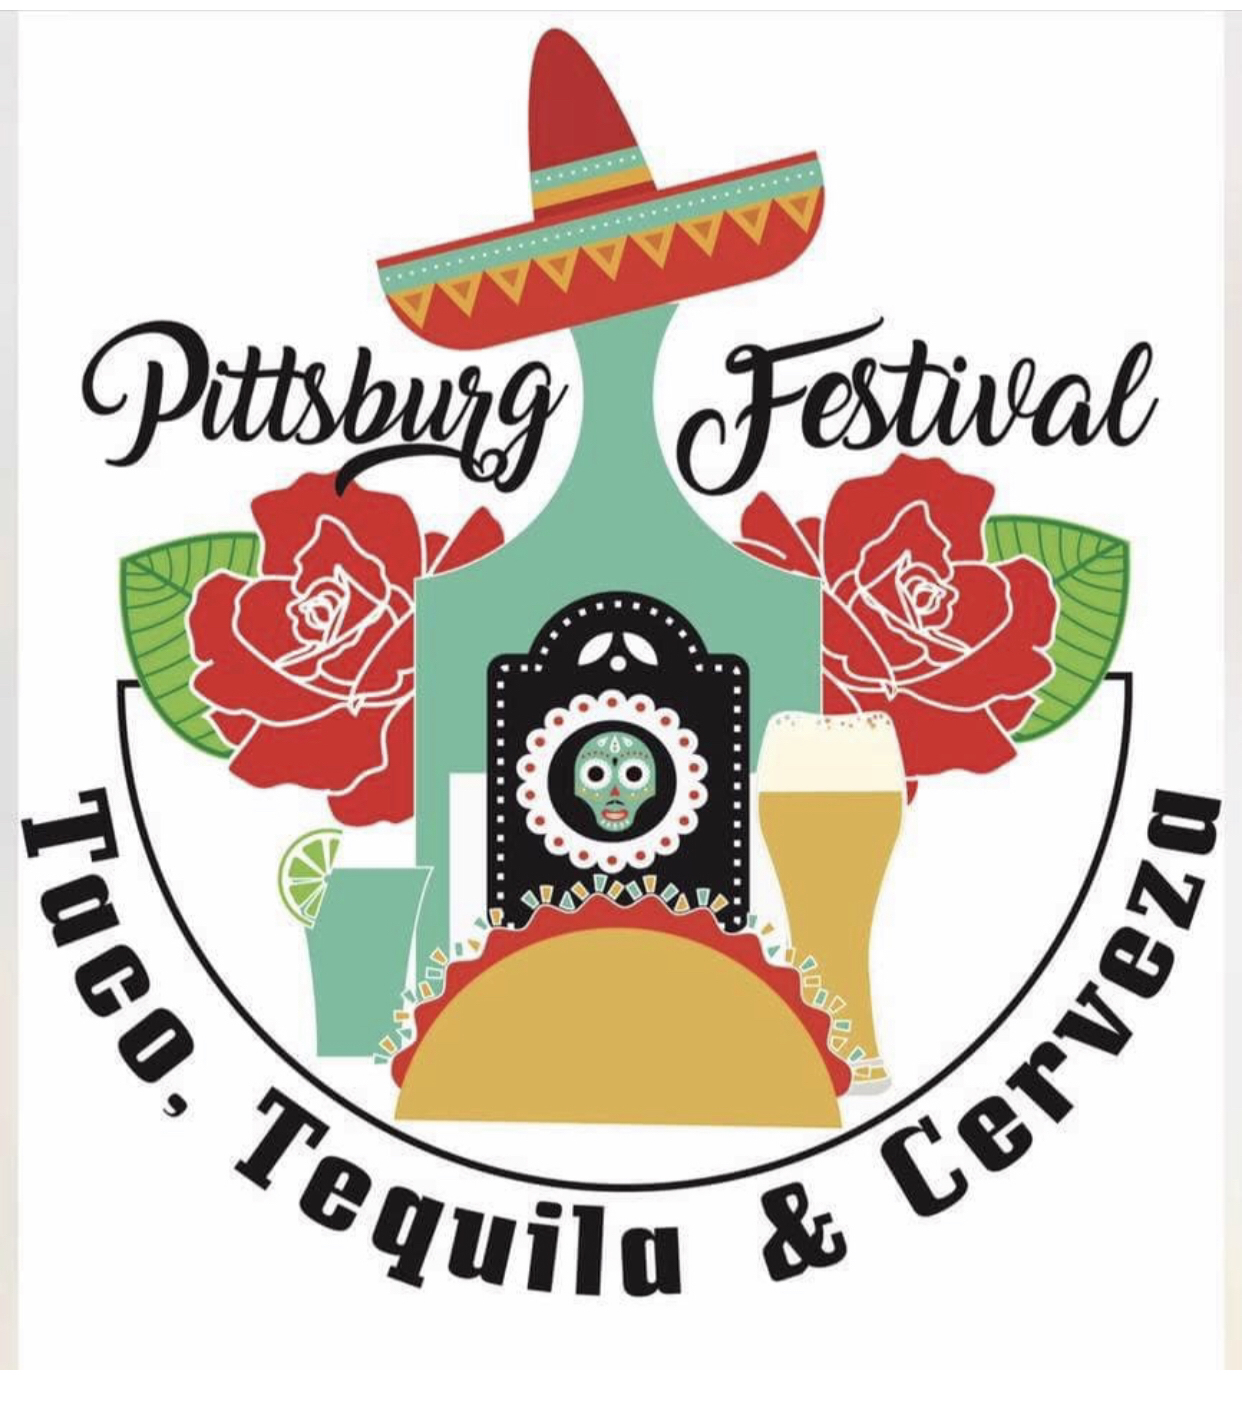 Taco, Tequila & Cerveza Festival at Pittsburg Arts and Community